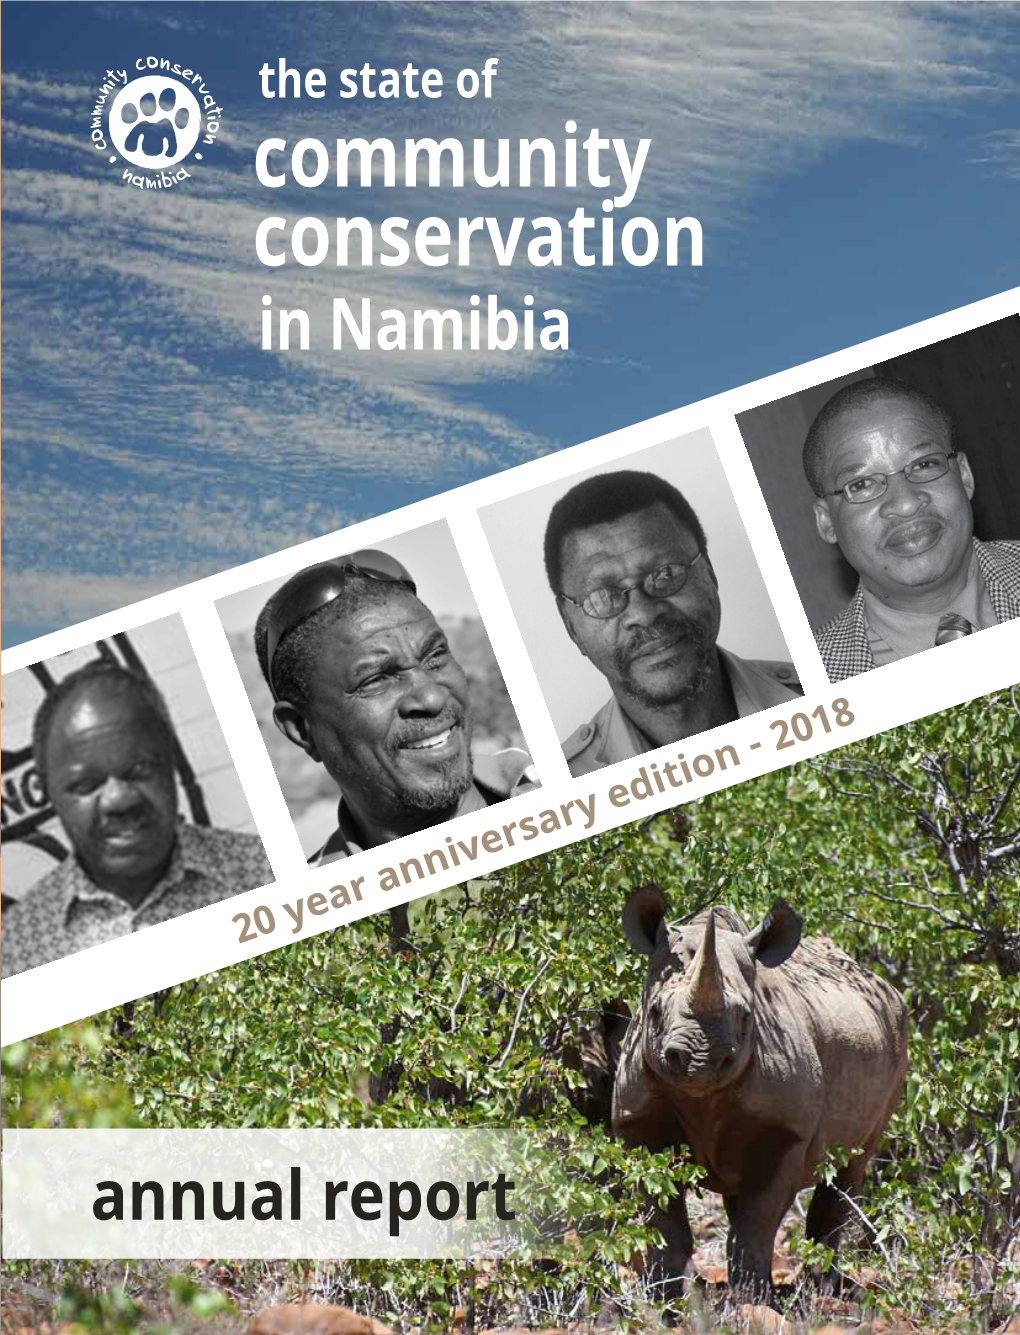 The State of Community Conservation Report 2018